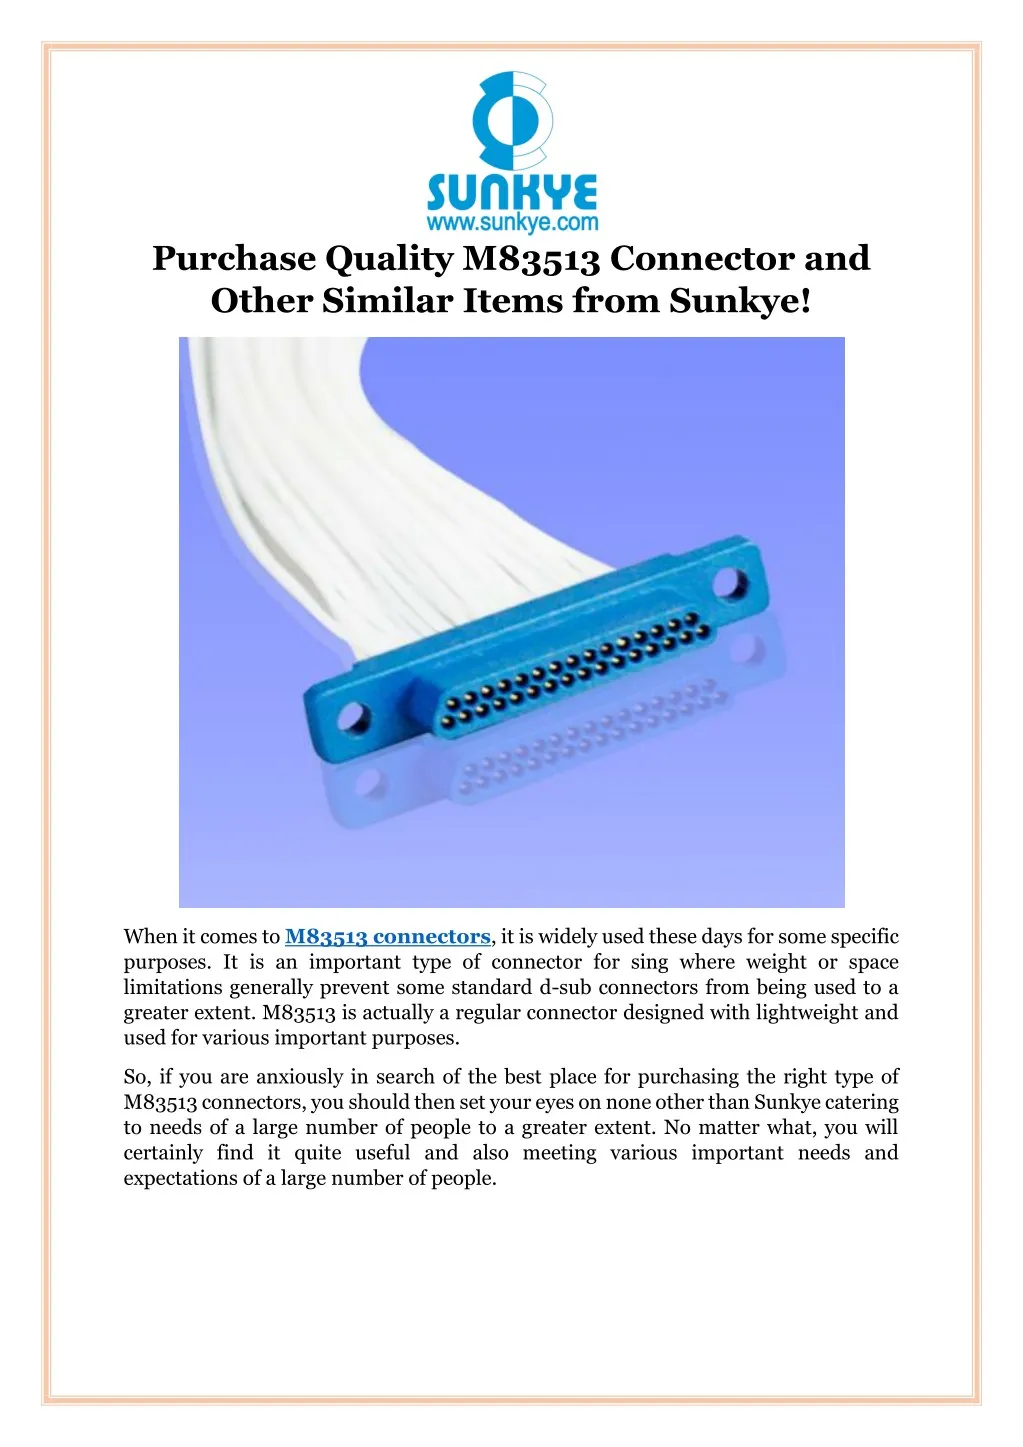 purchase quality m83513 connector and other